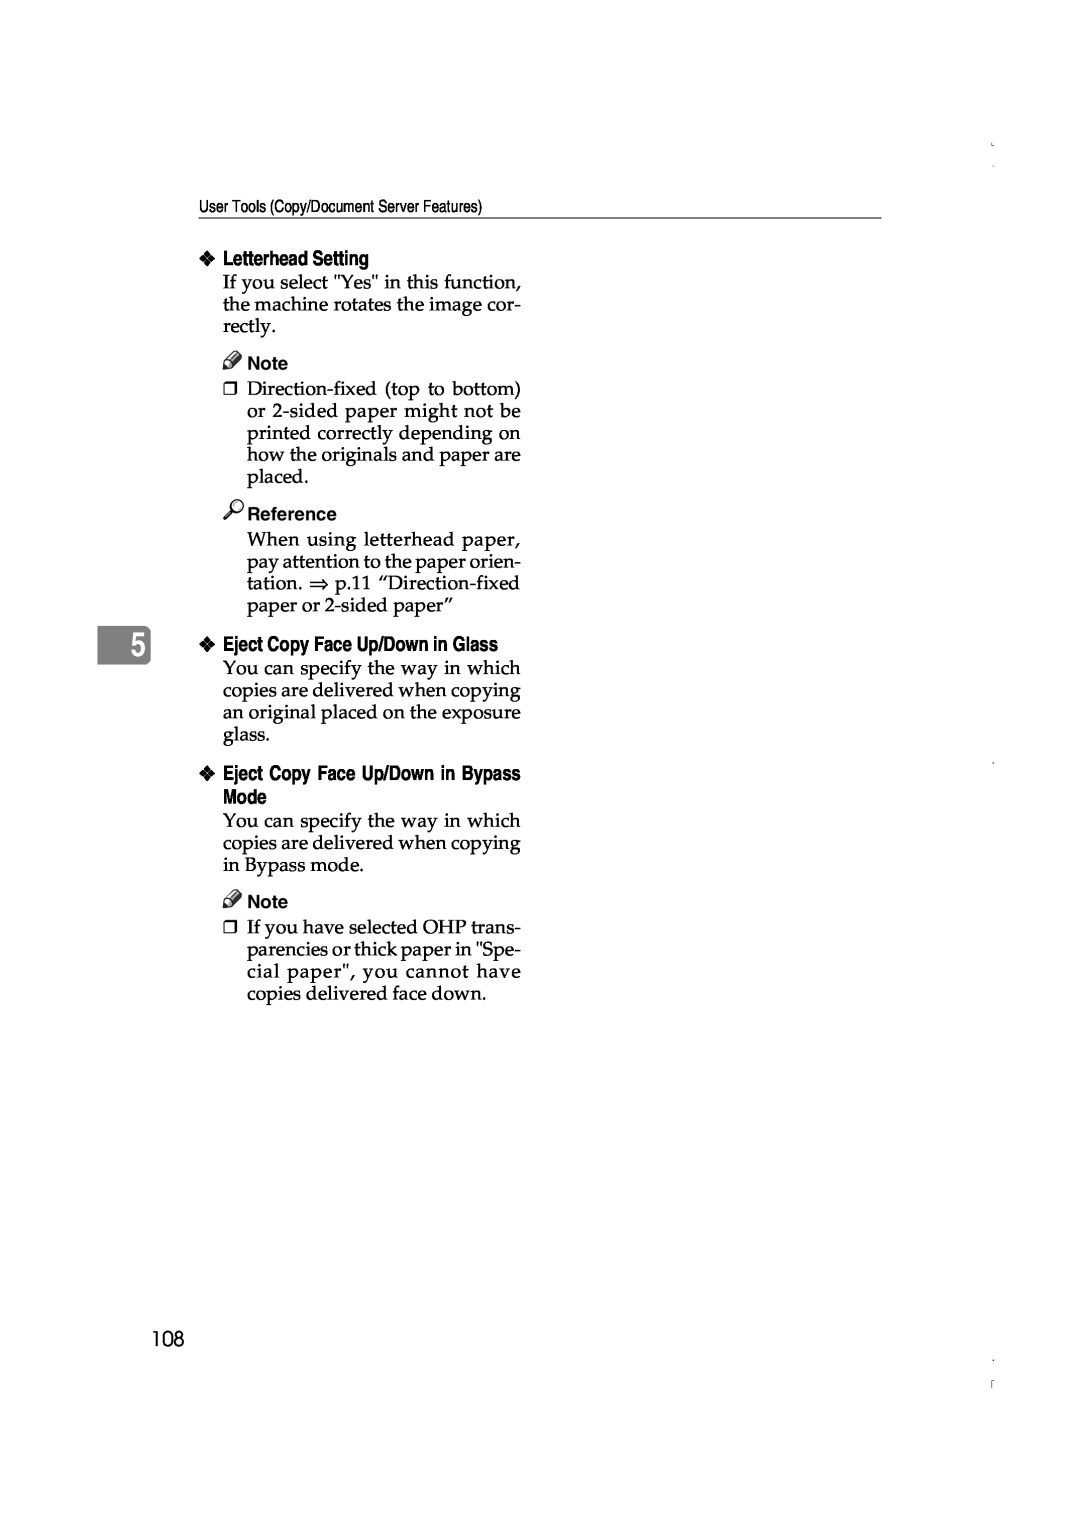 Lanier LD075 manual Letterhead Setting, Eject Copy Face Up/Down in Bypass Mode, Reference, Eject Copy Face Up/Down in Glass 